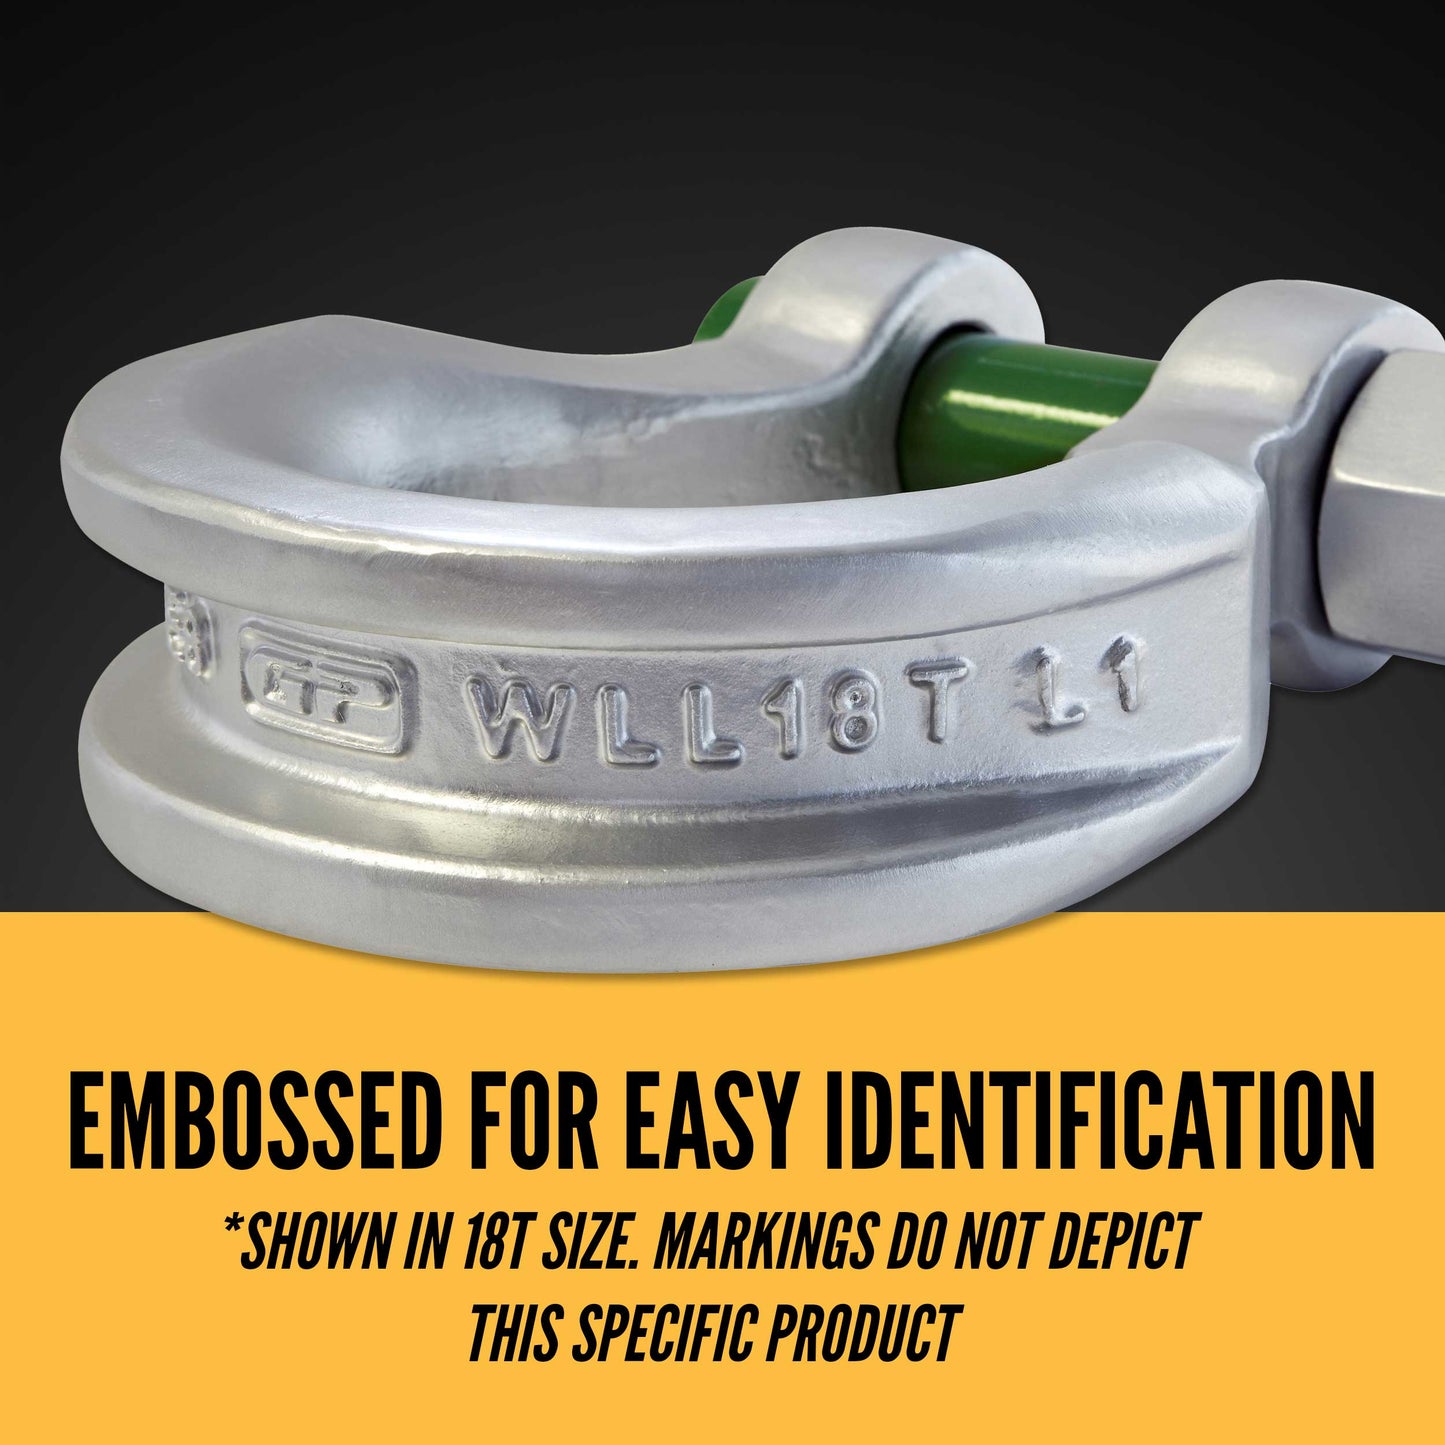 Van Beest Green Pin Bolt Type Wide Body Sling Shackle | P-6033 - 75 Ton embossed for easy identification